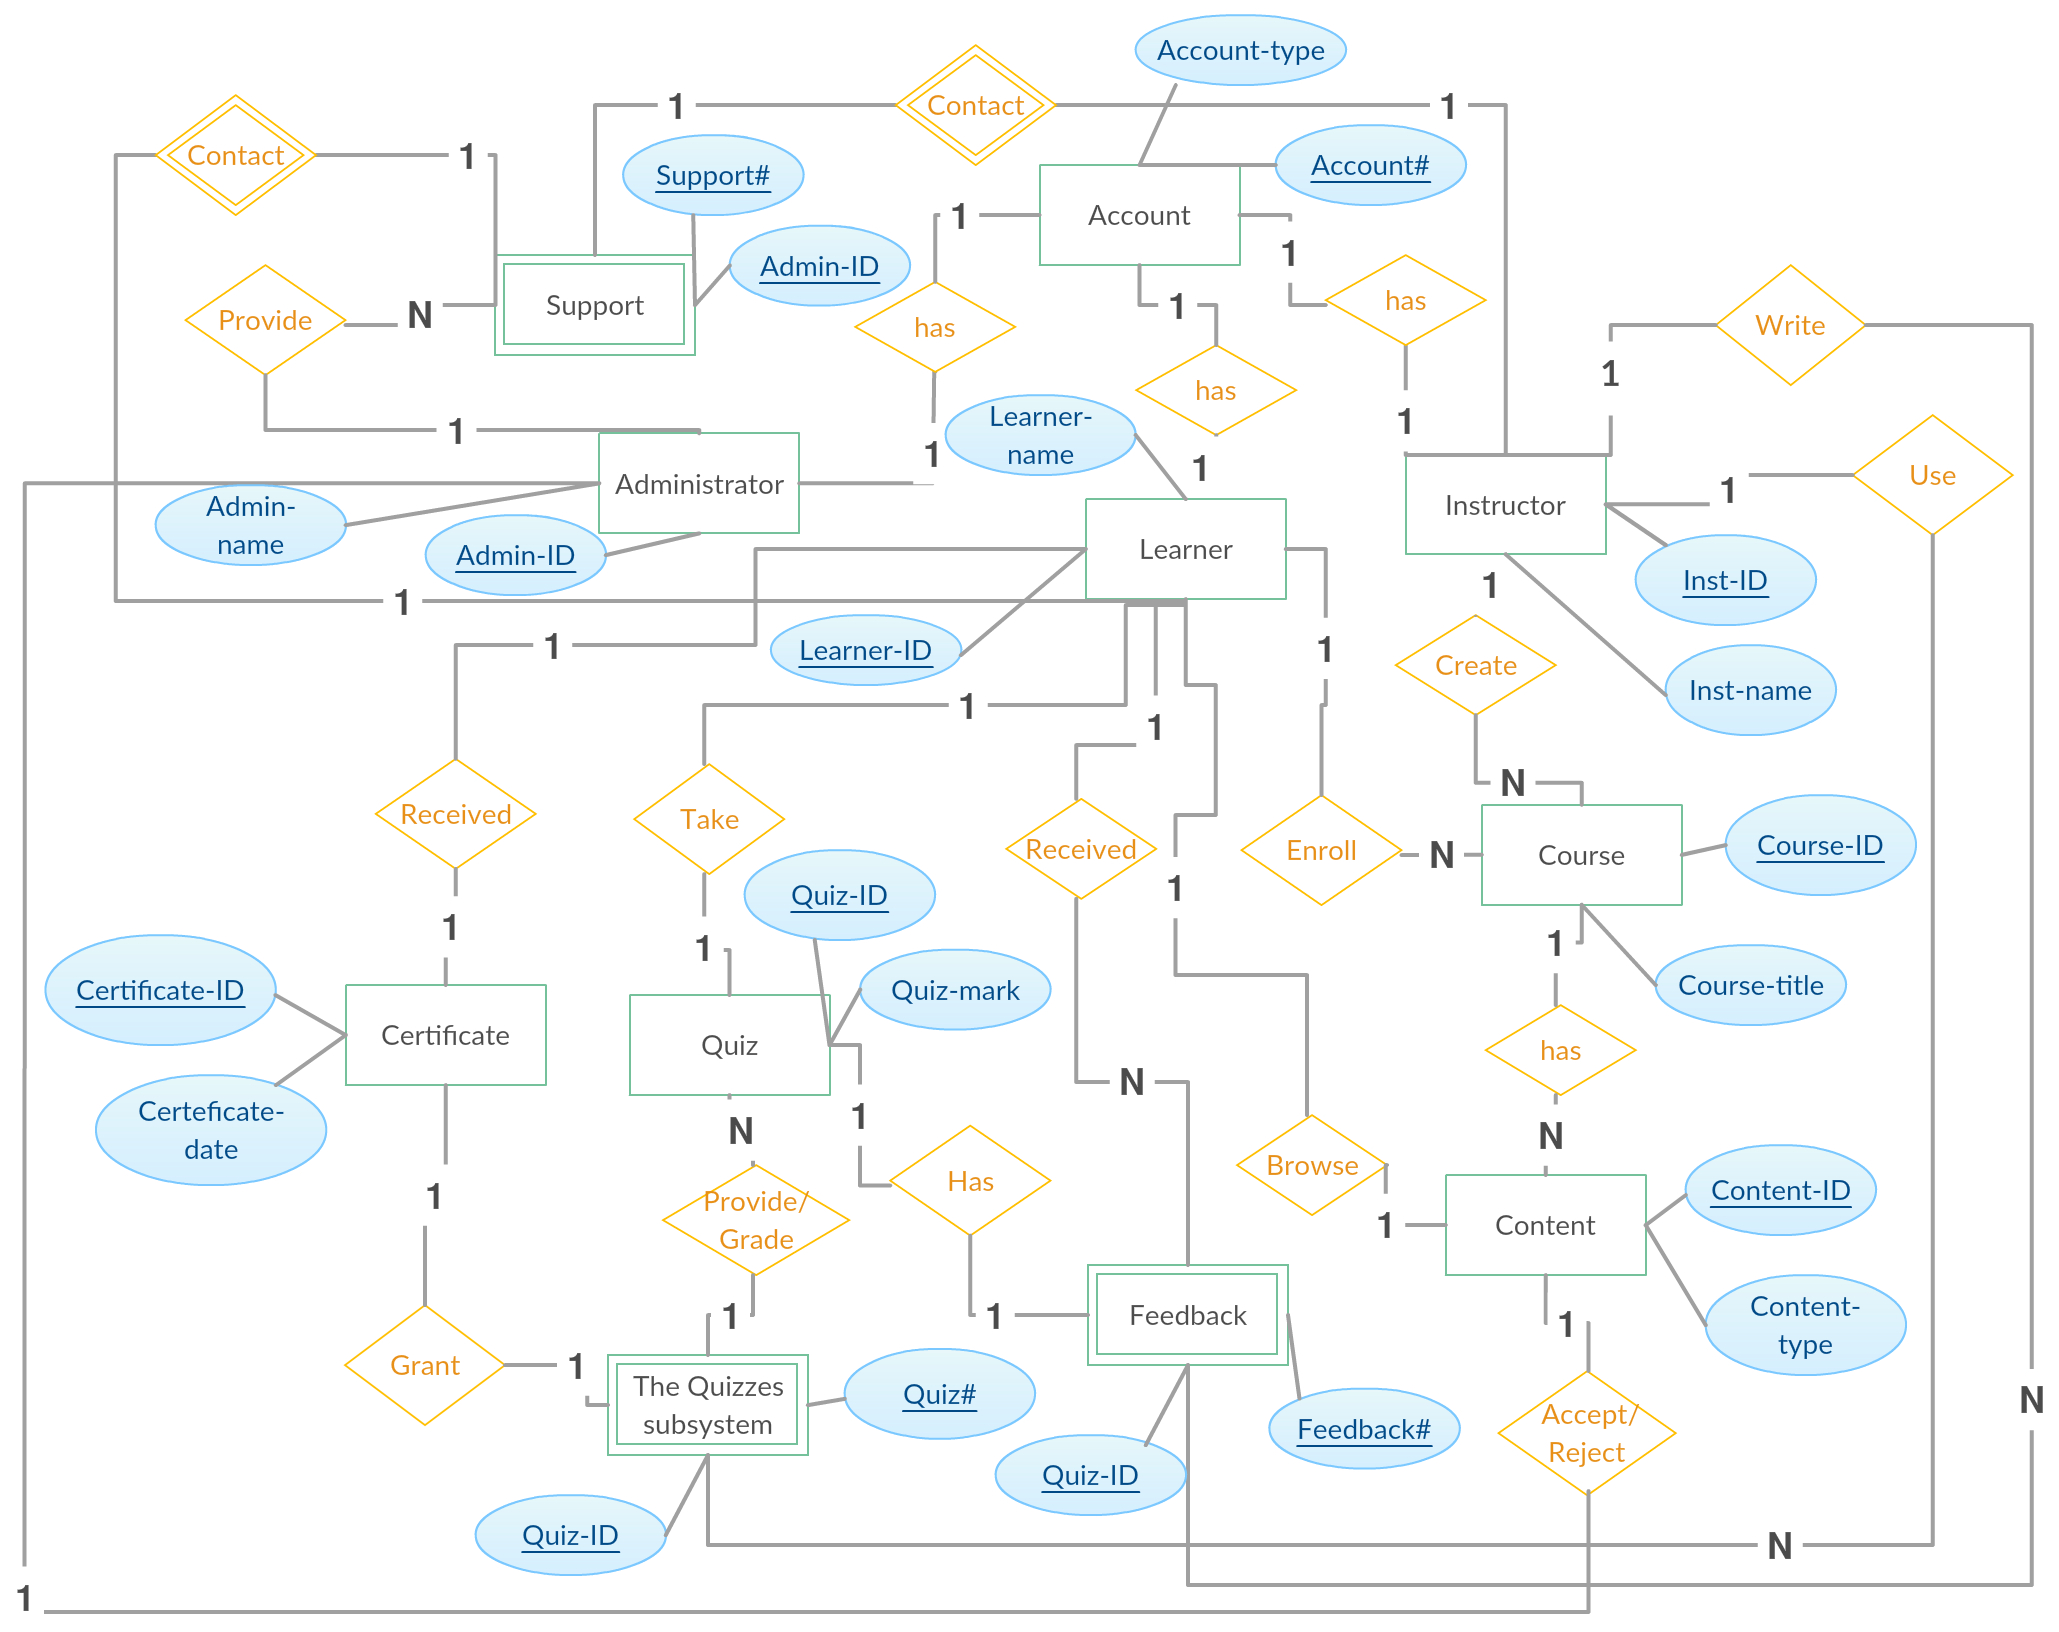 Entity Relationship Diagram (Er Diagram) Of E-Learning pertaining to Er Diagram Based On Queries